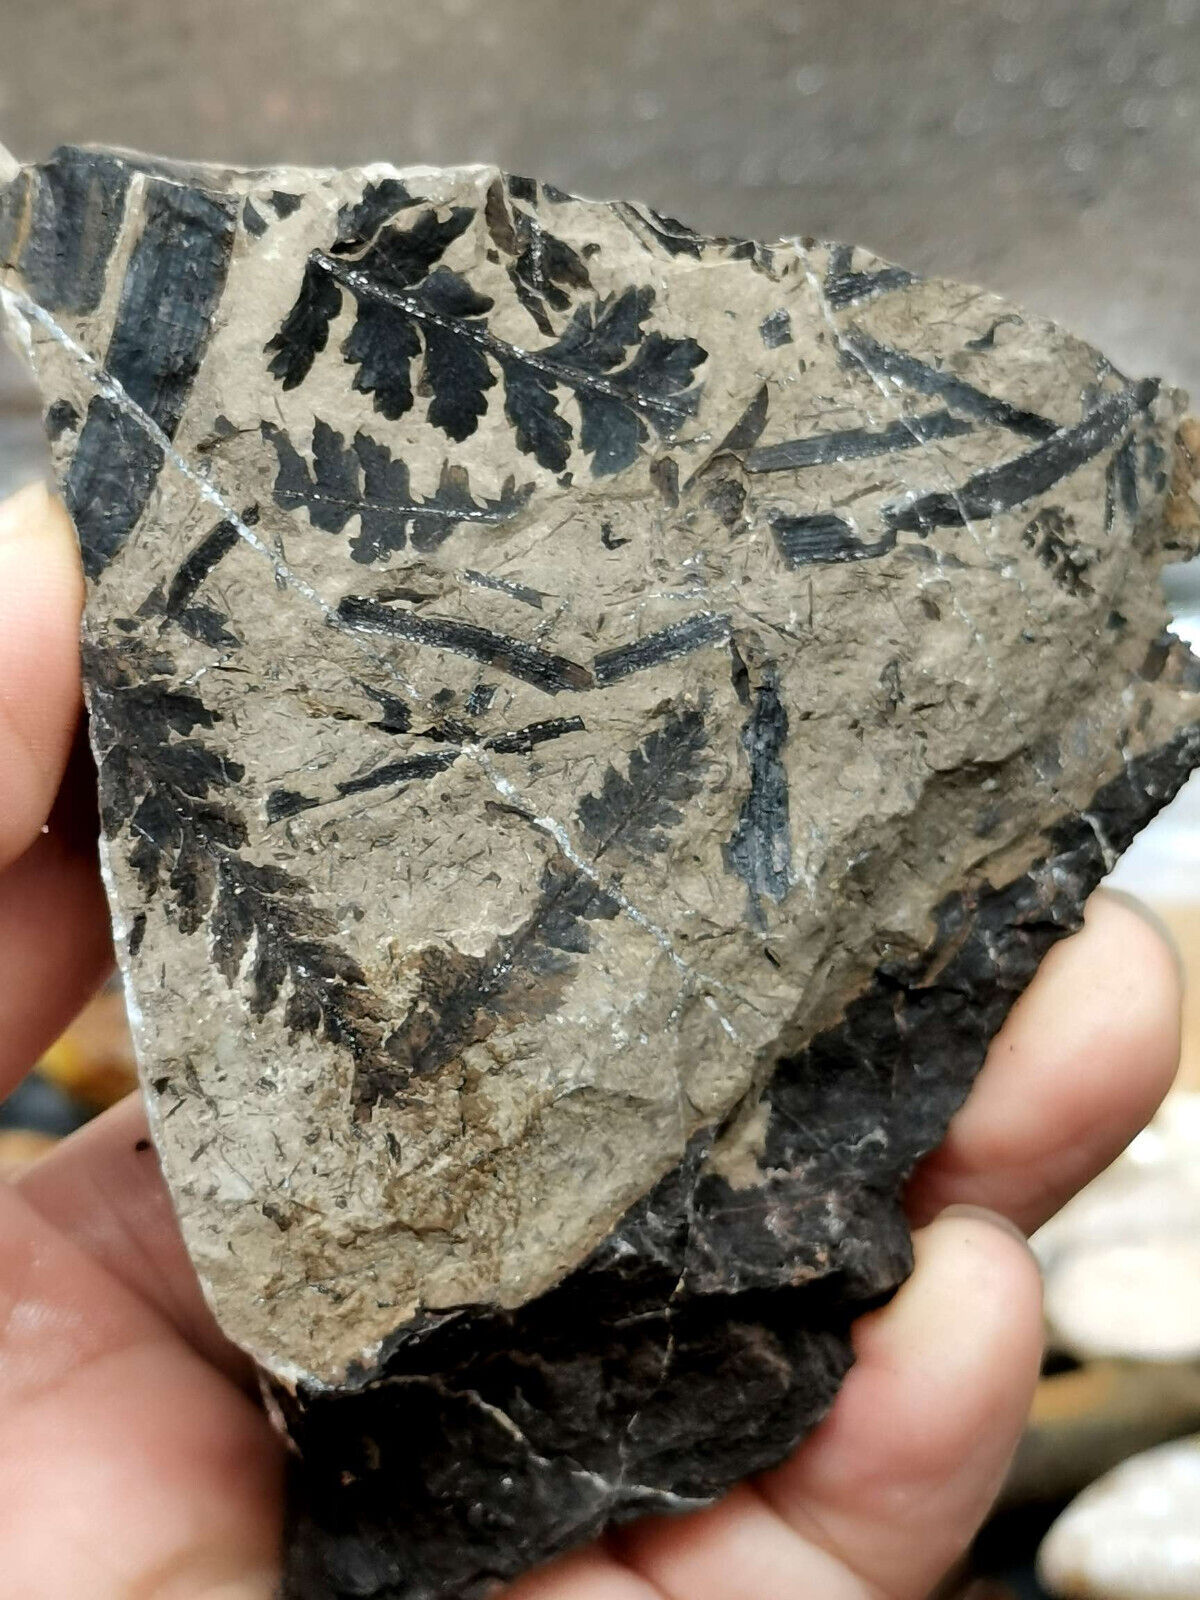 Jurassic leaf plant Fossils from the Ice Age